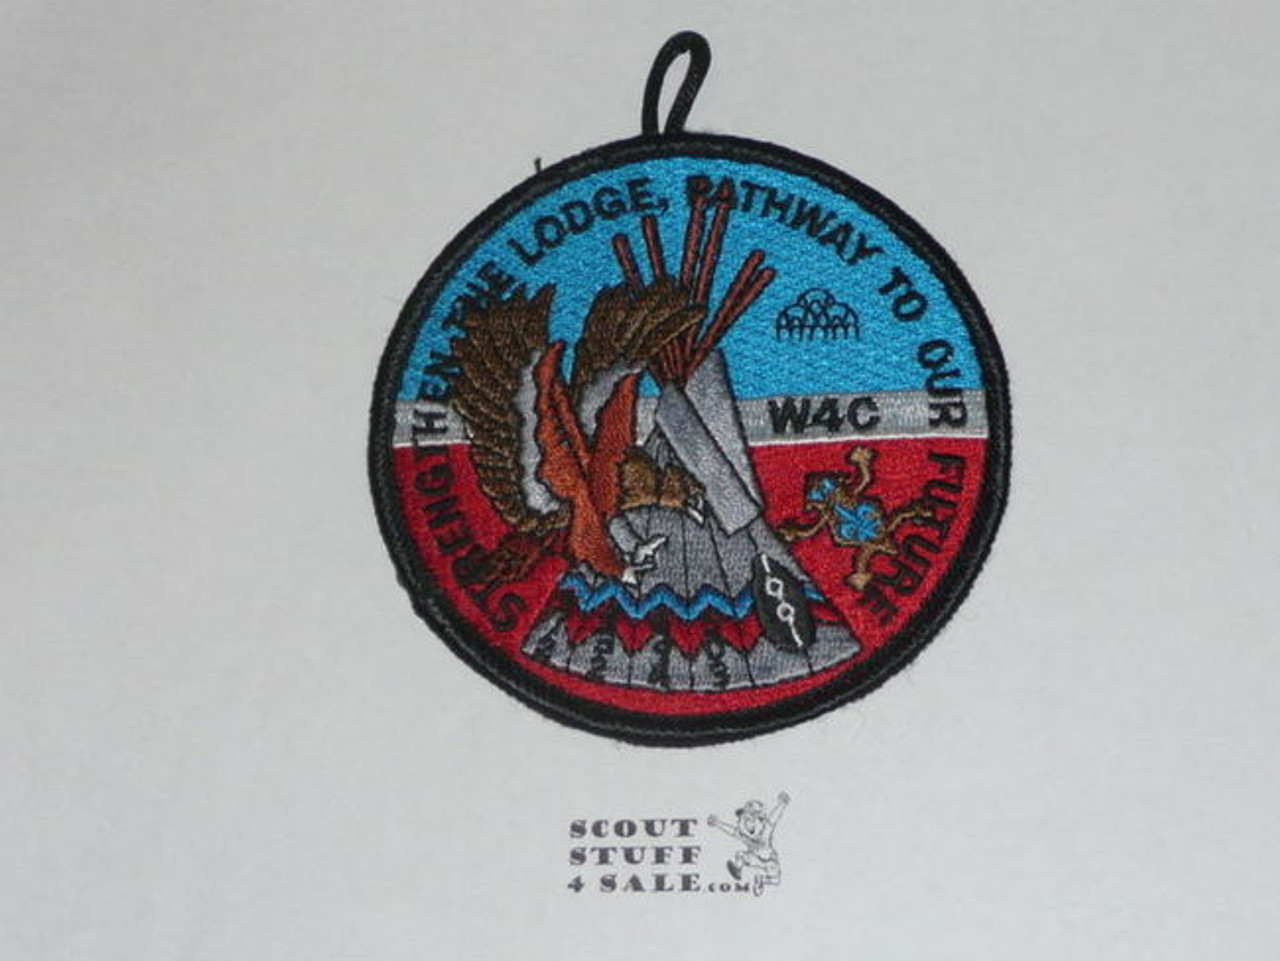 Section / Area W4C Order of the Arrow Conference Patch, 1991